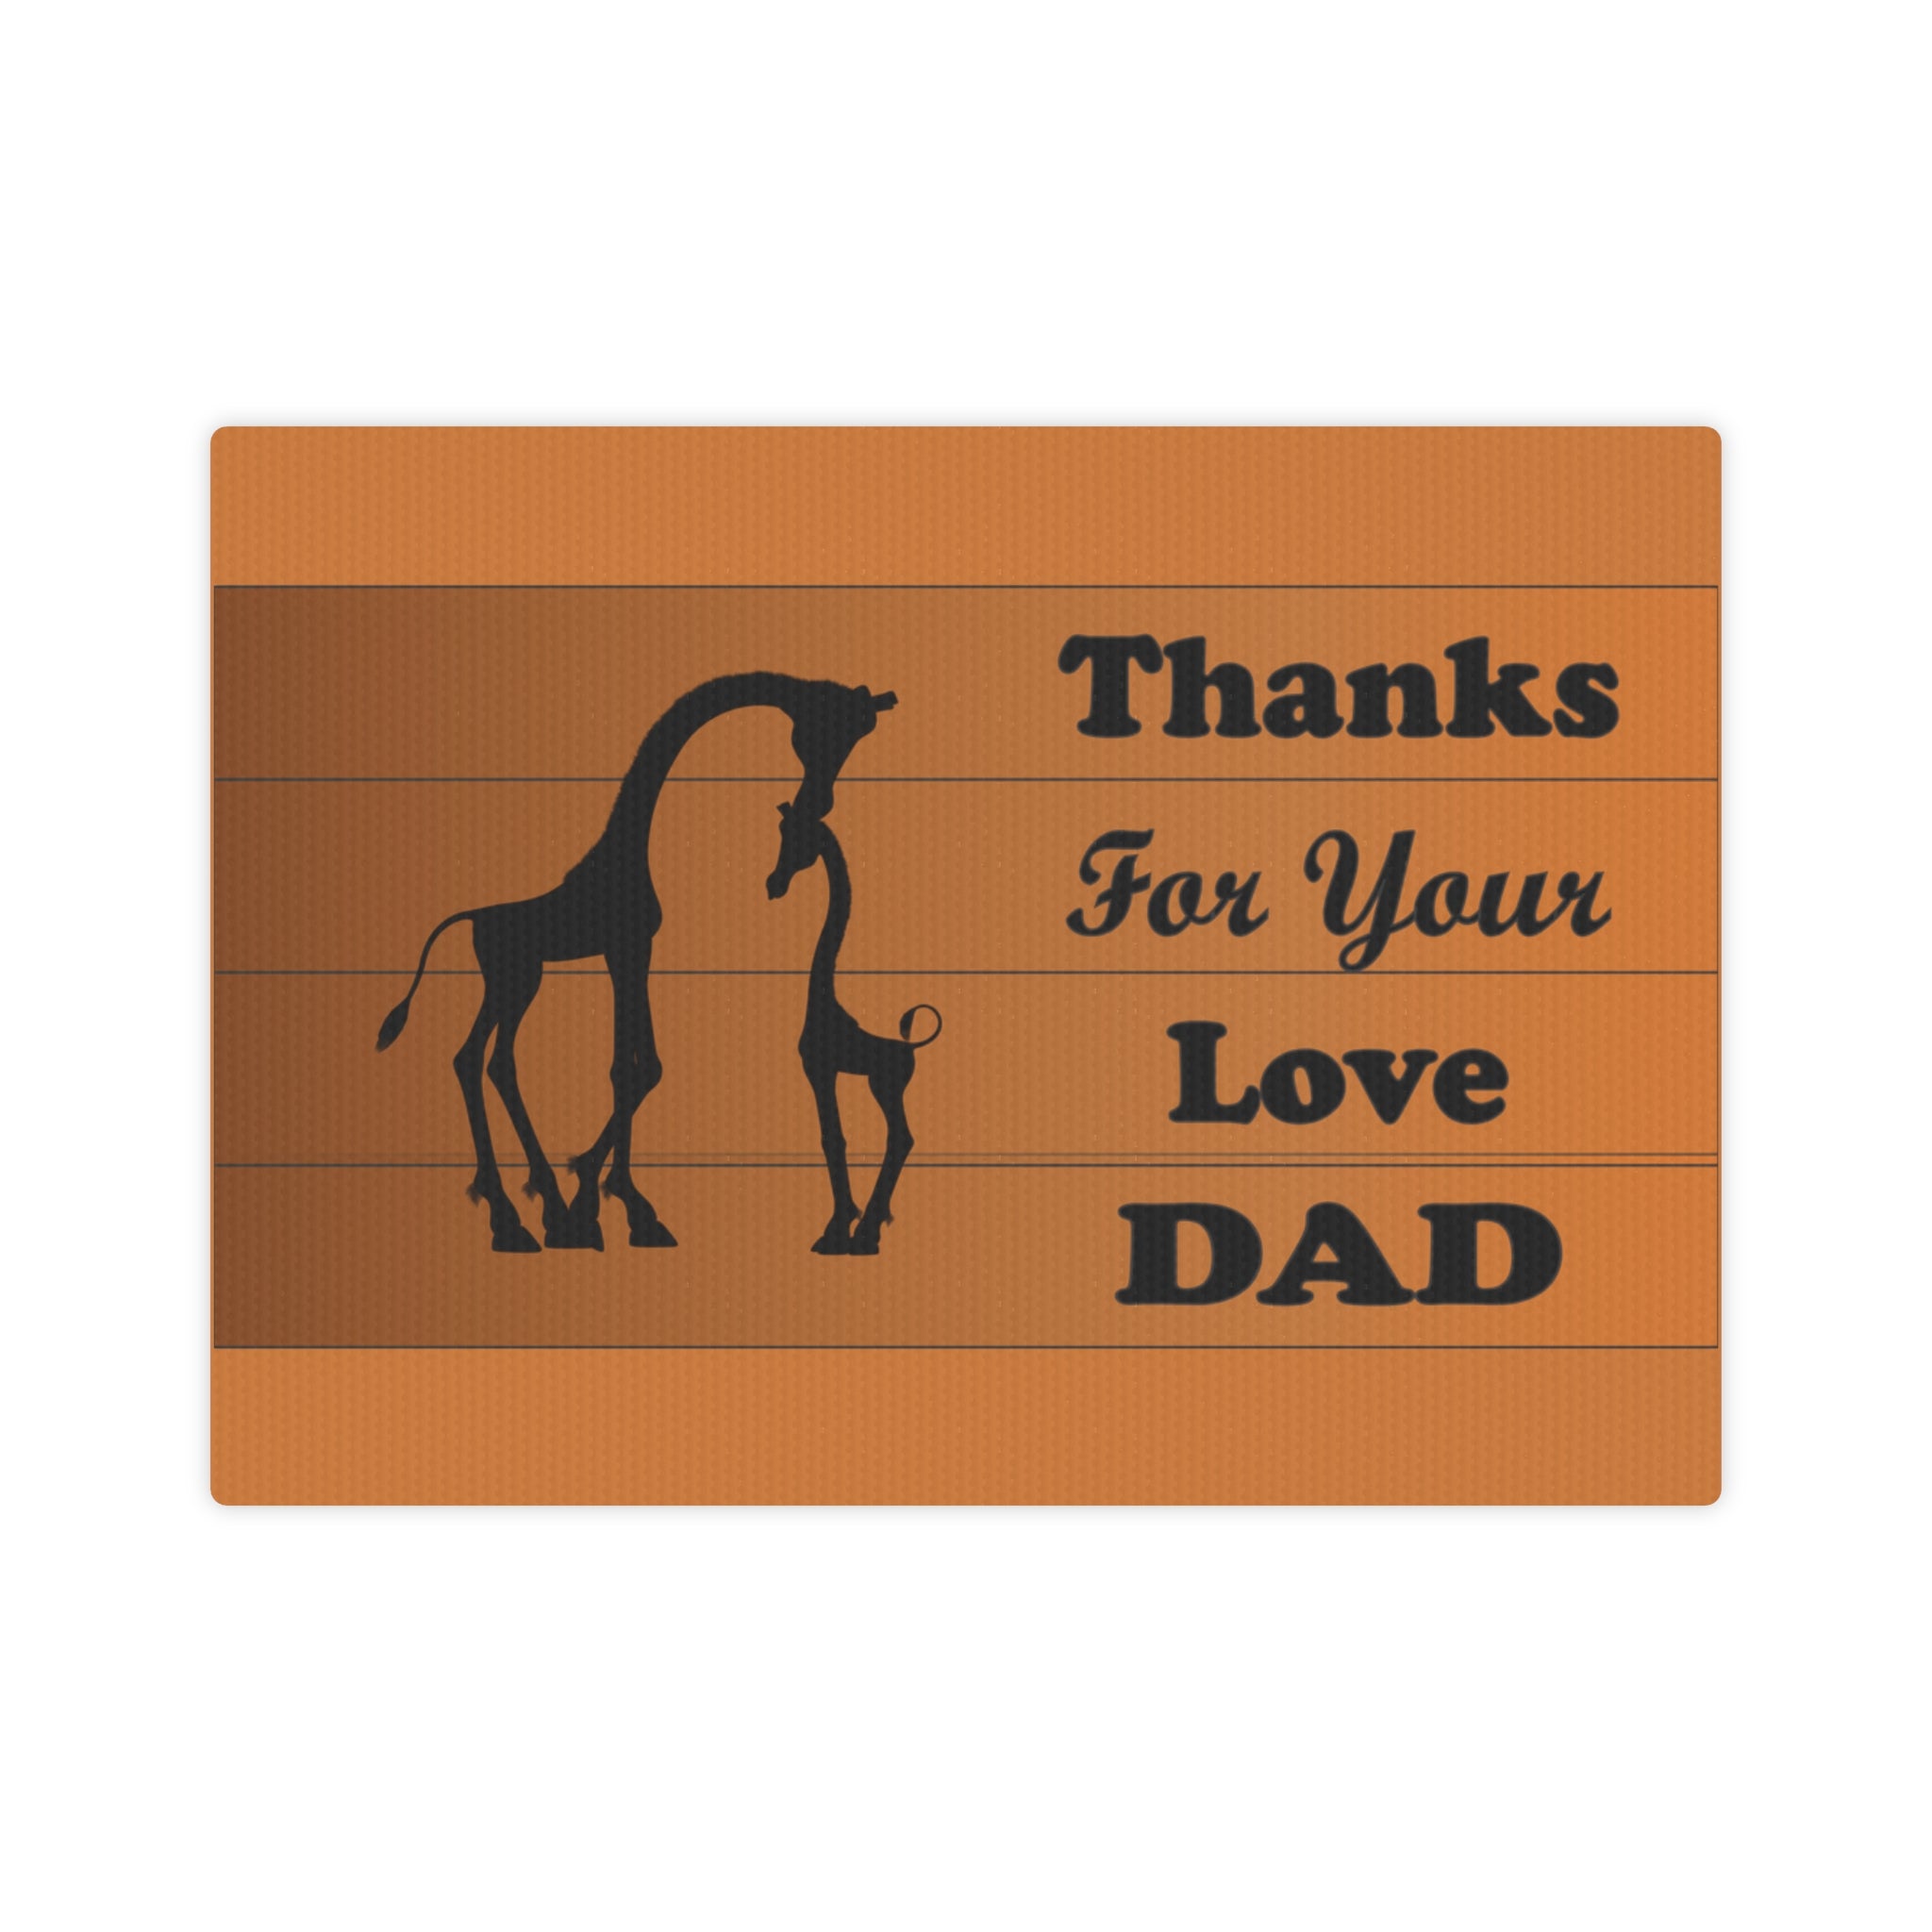 Giraffe Canvas Photo Tile - Thanks For Your Love Dad